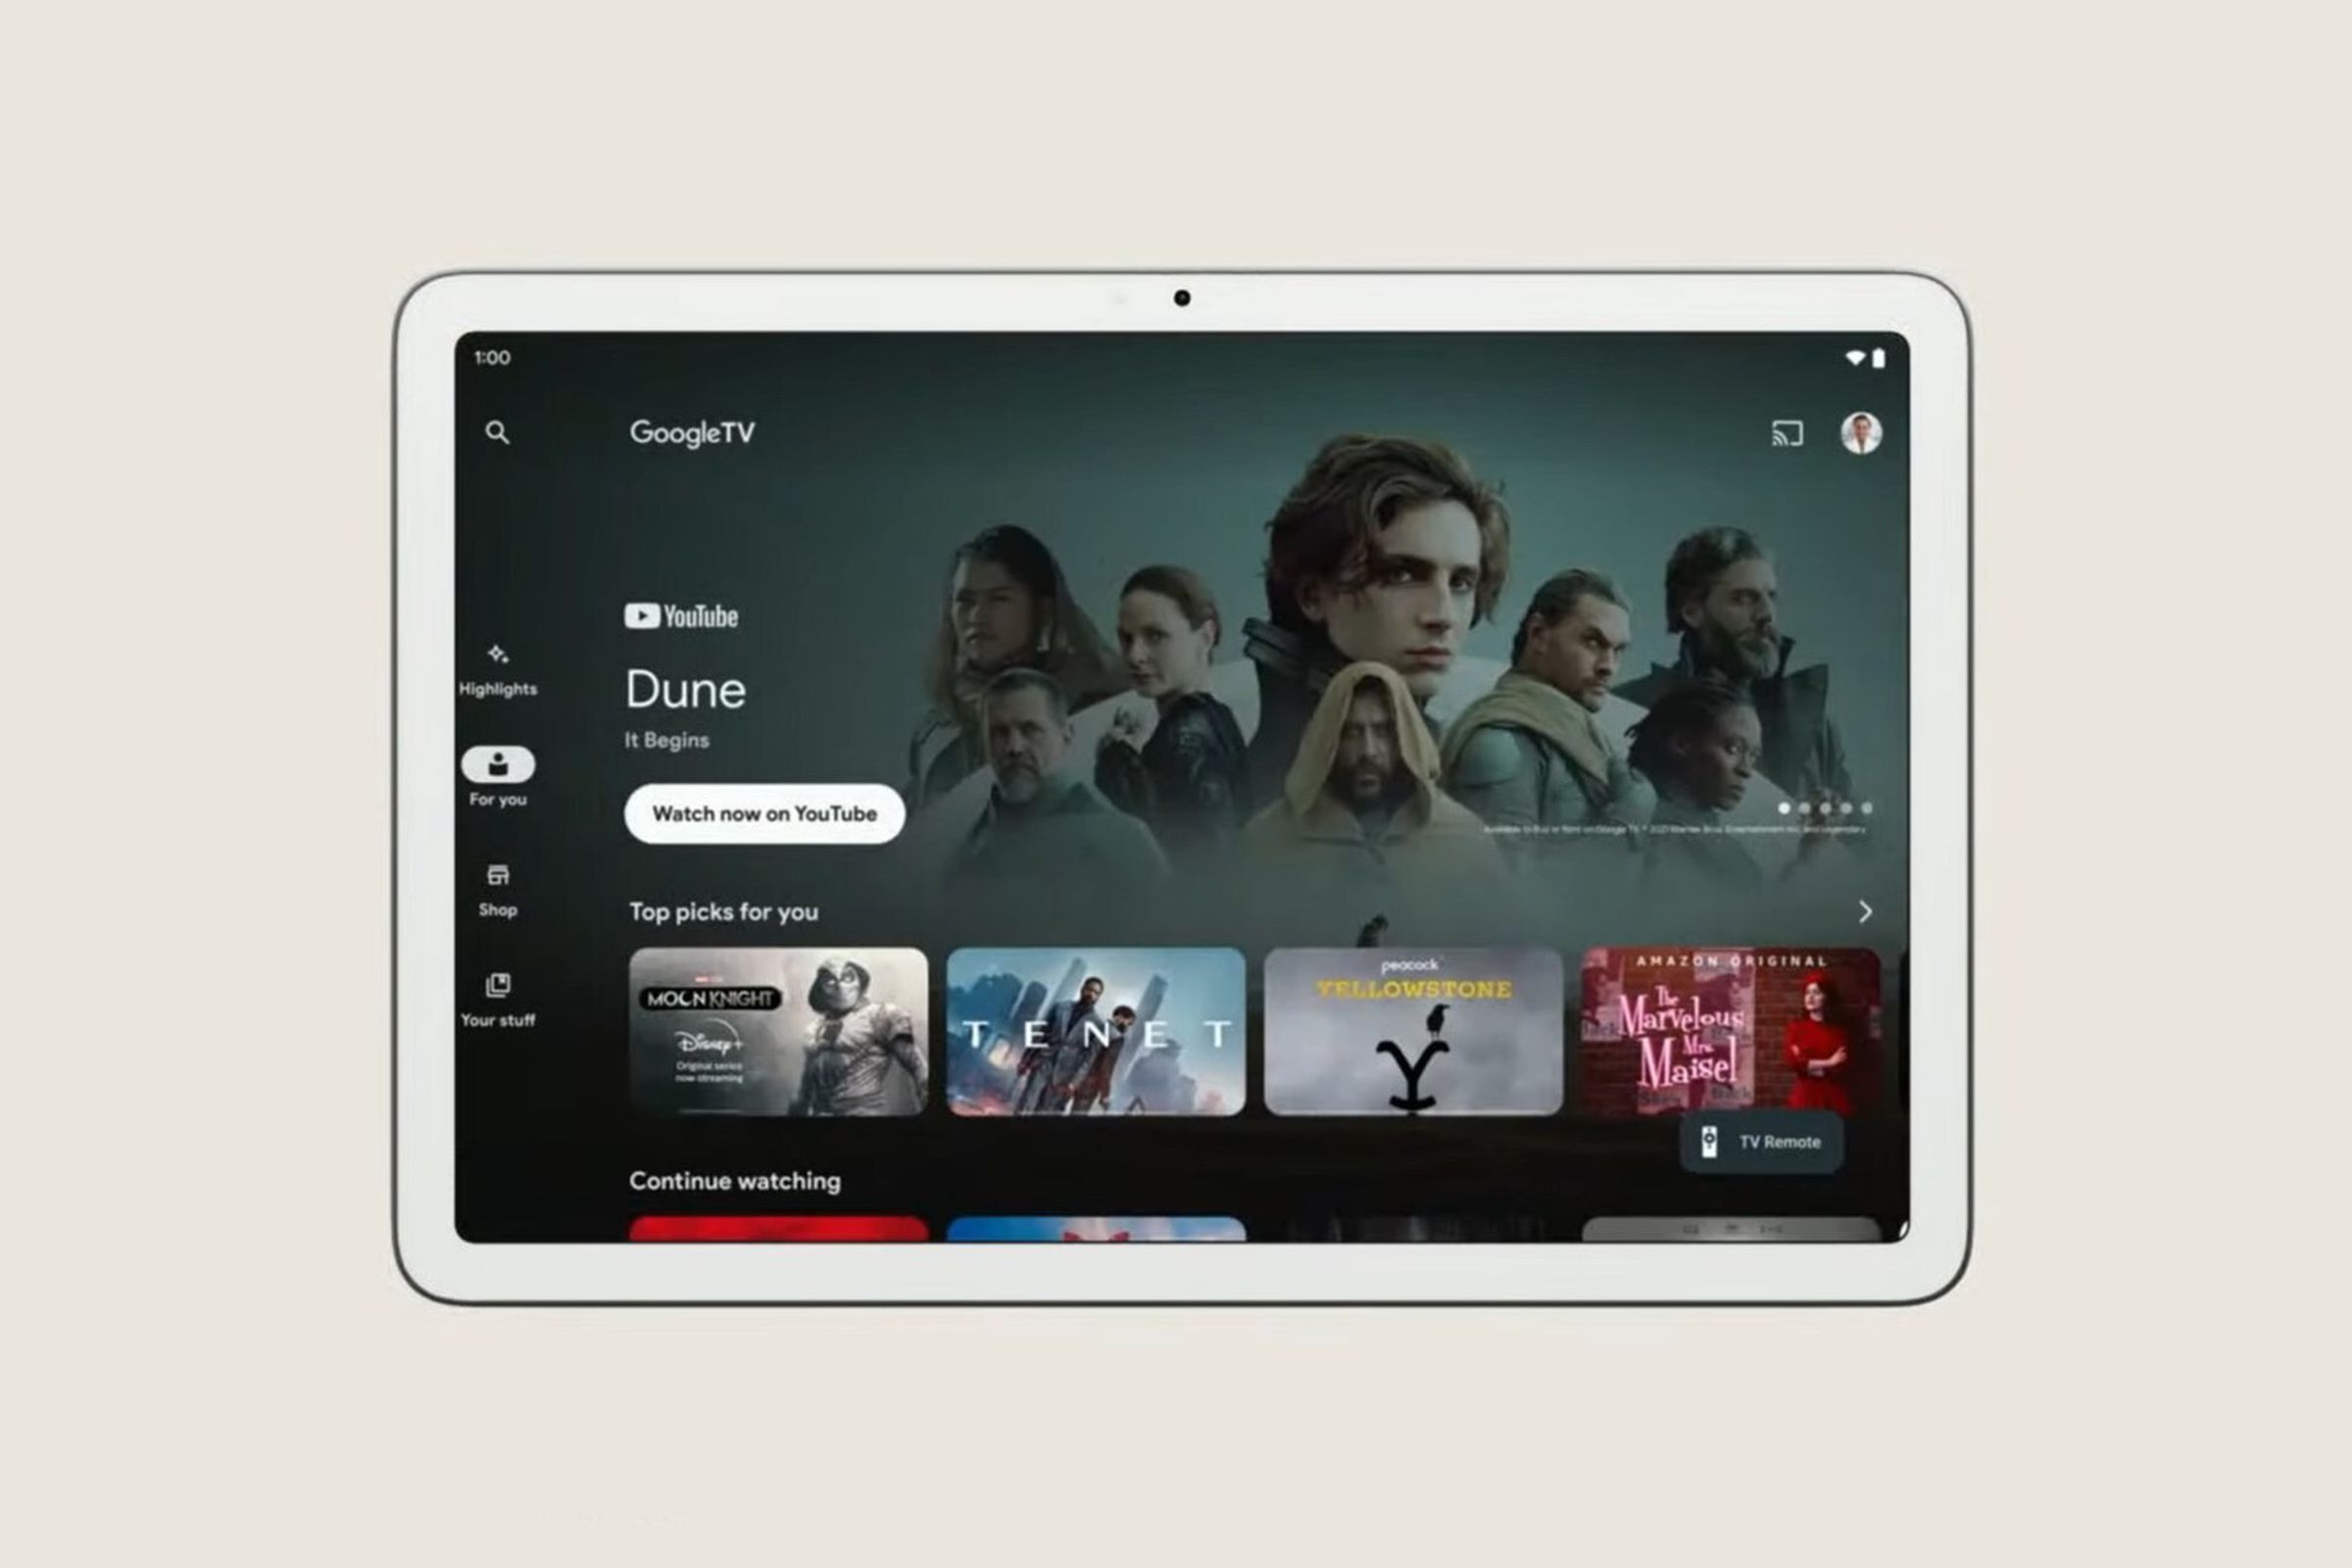 An image showing the display of Google’s Pixel tablet